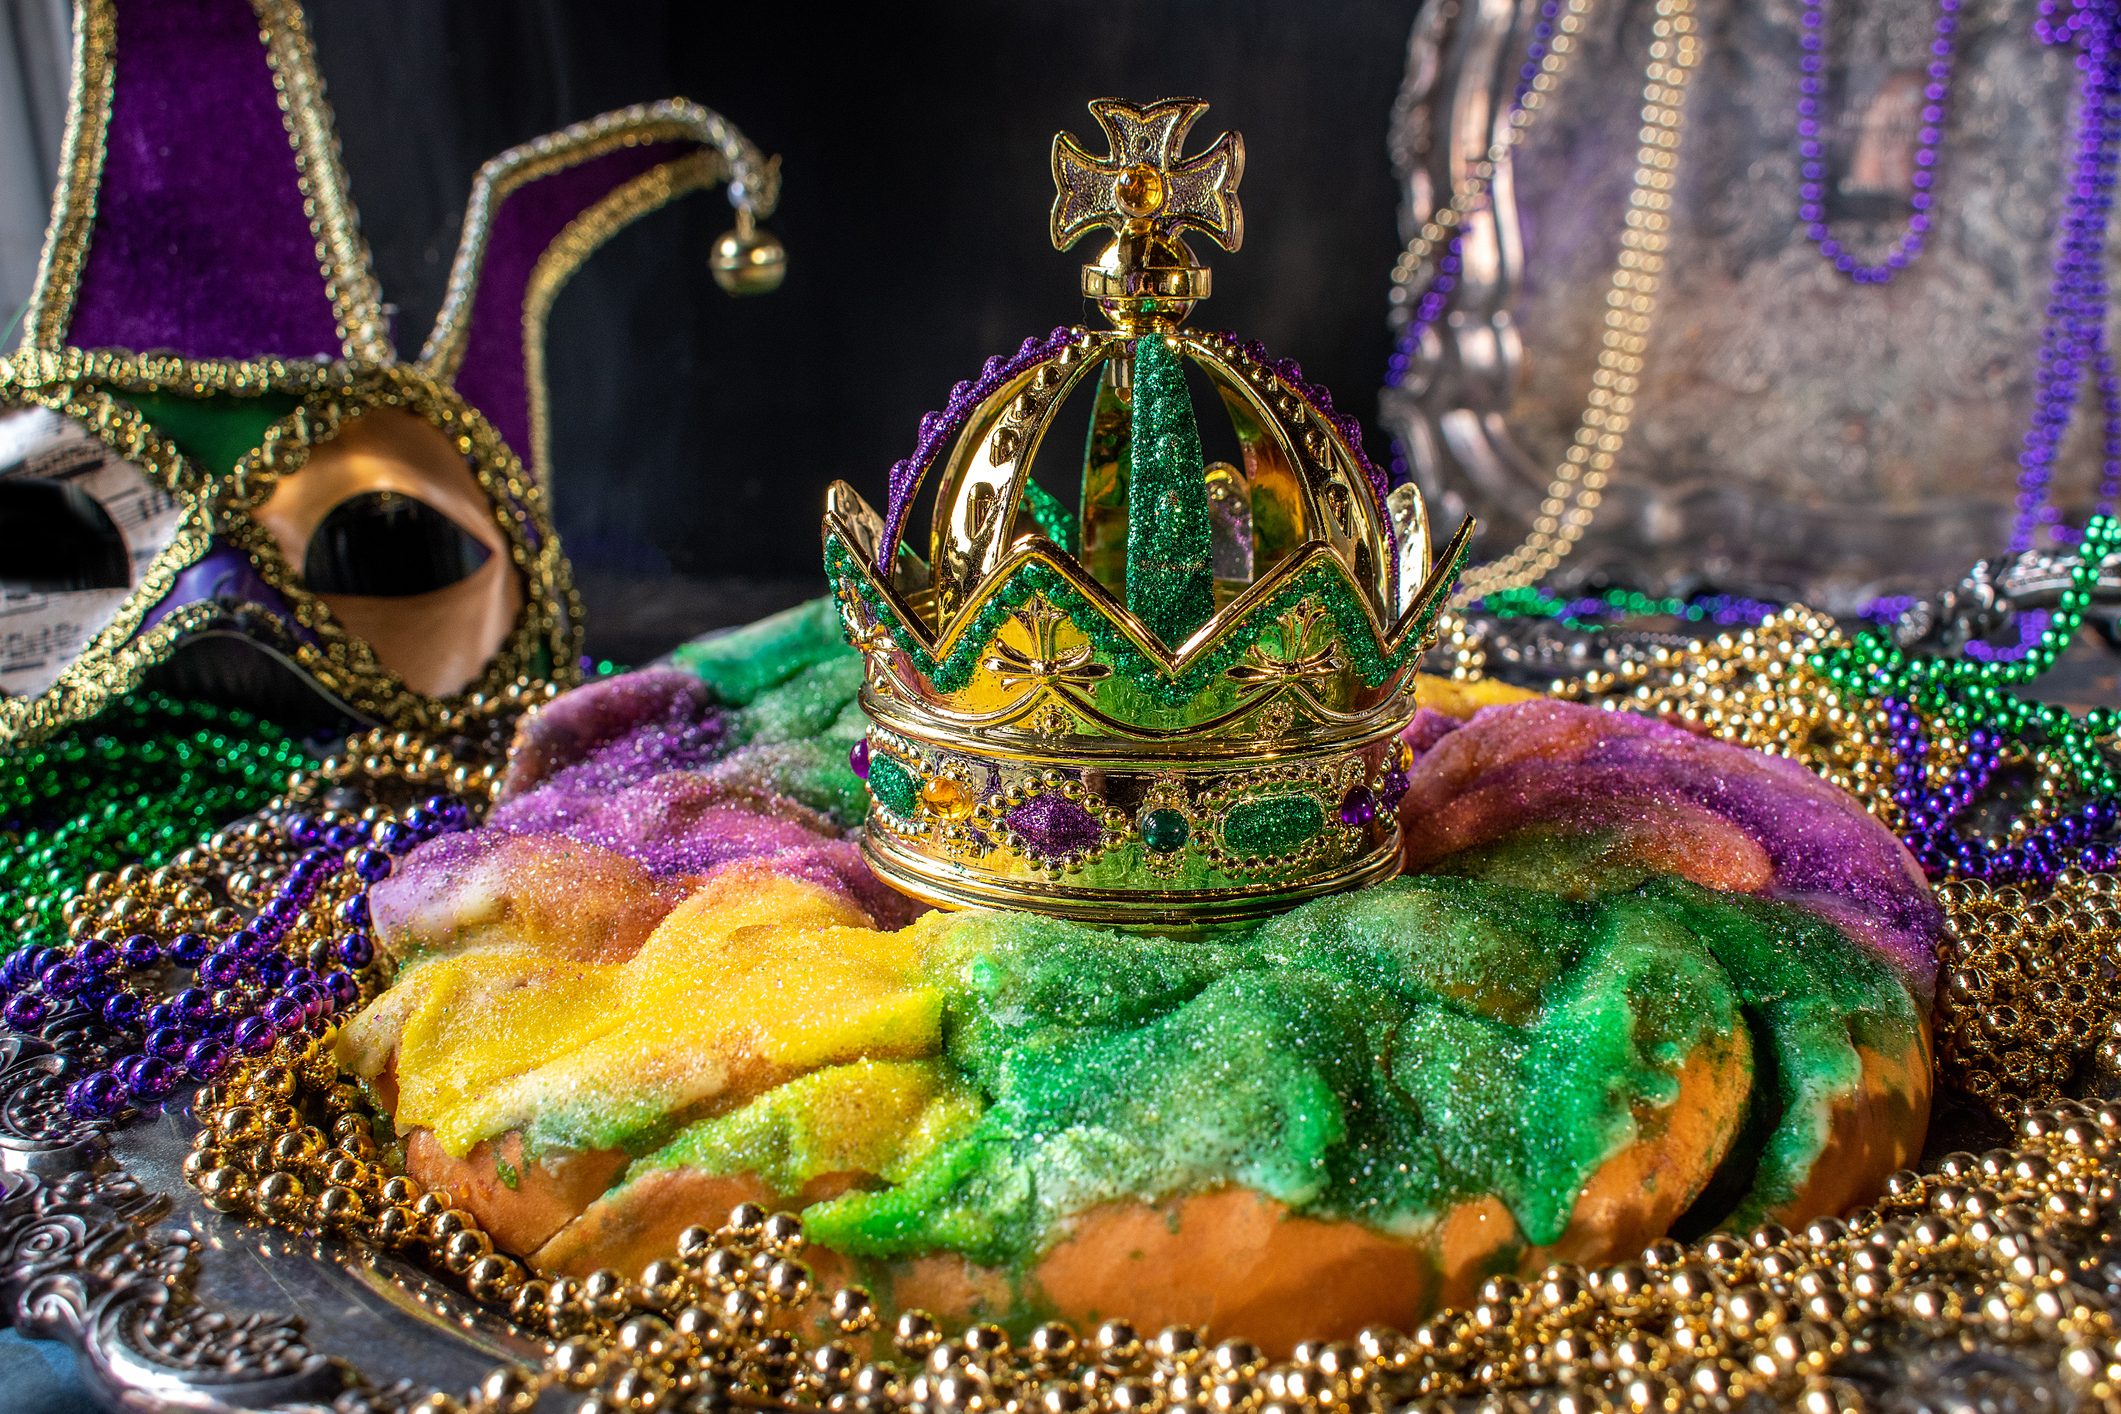 What Is King Cake — History And Meaning Of The Mardi Gras King Cake